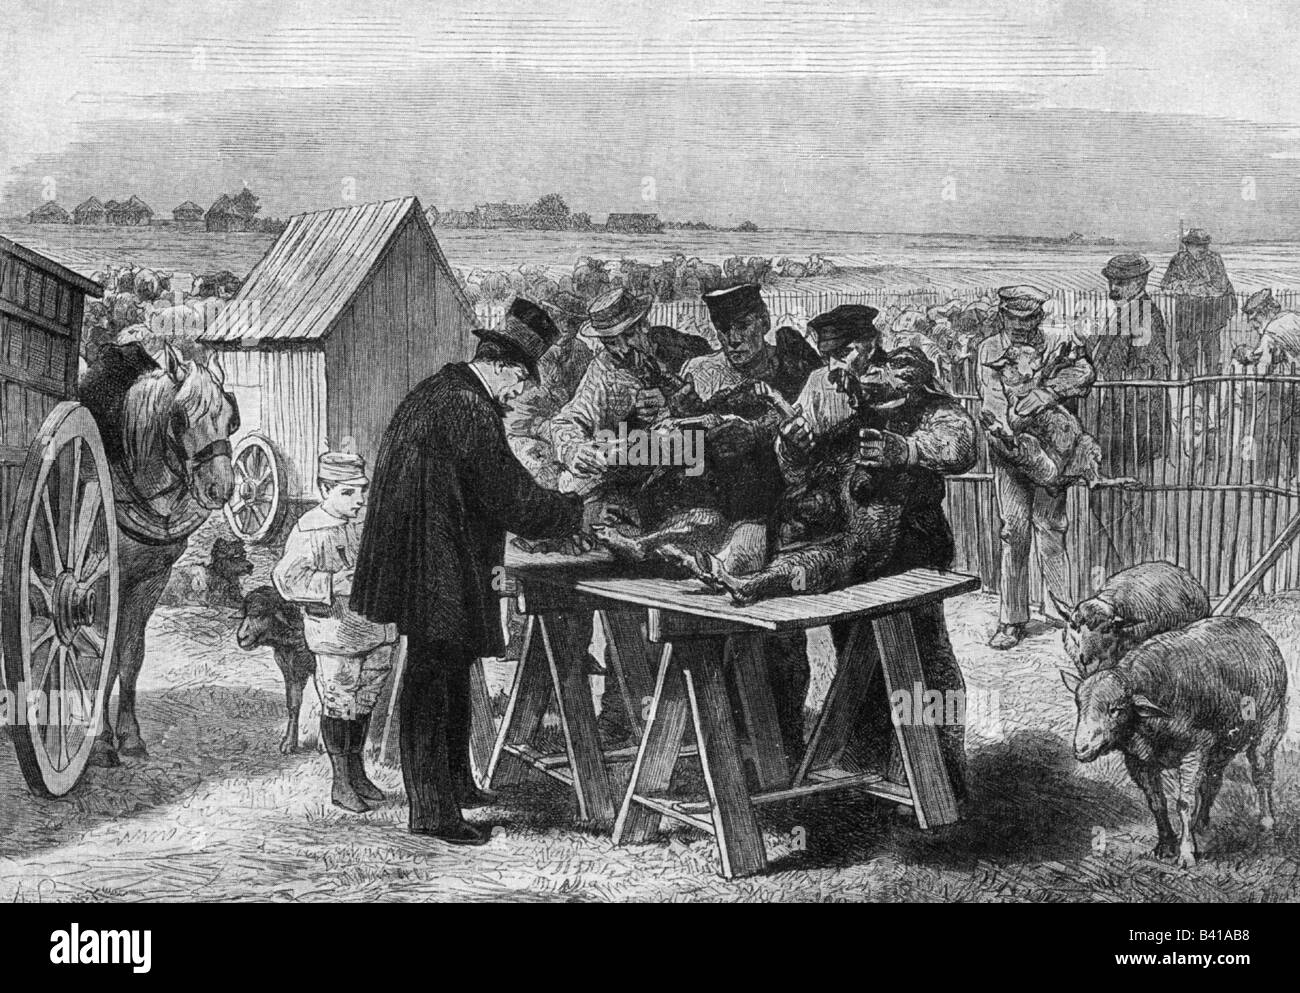 Pasteur, Louis, 27.12.1822 - 28.9.1895, French scientist, microbiologist, chemist, vaccinating sheep against anthrax, Puilly-le-Fort, spring 1881, wood engraving by A. Laneon, Stock Photo